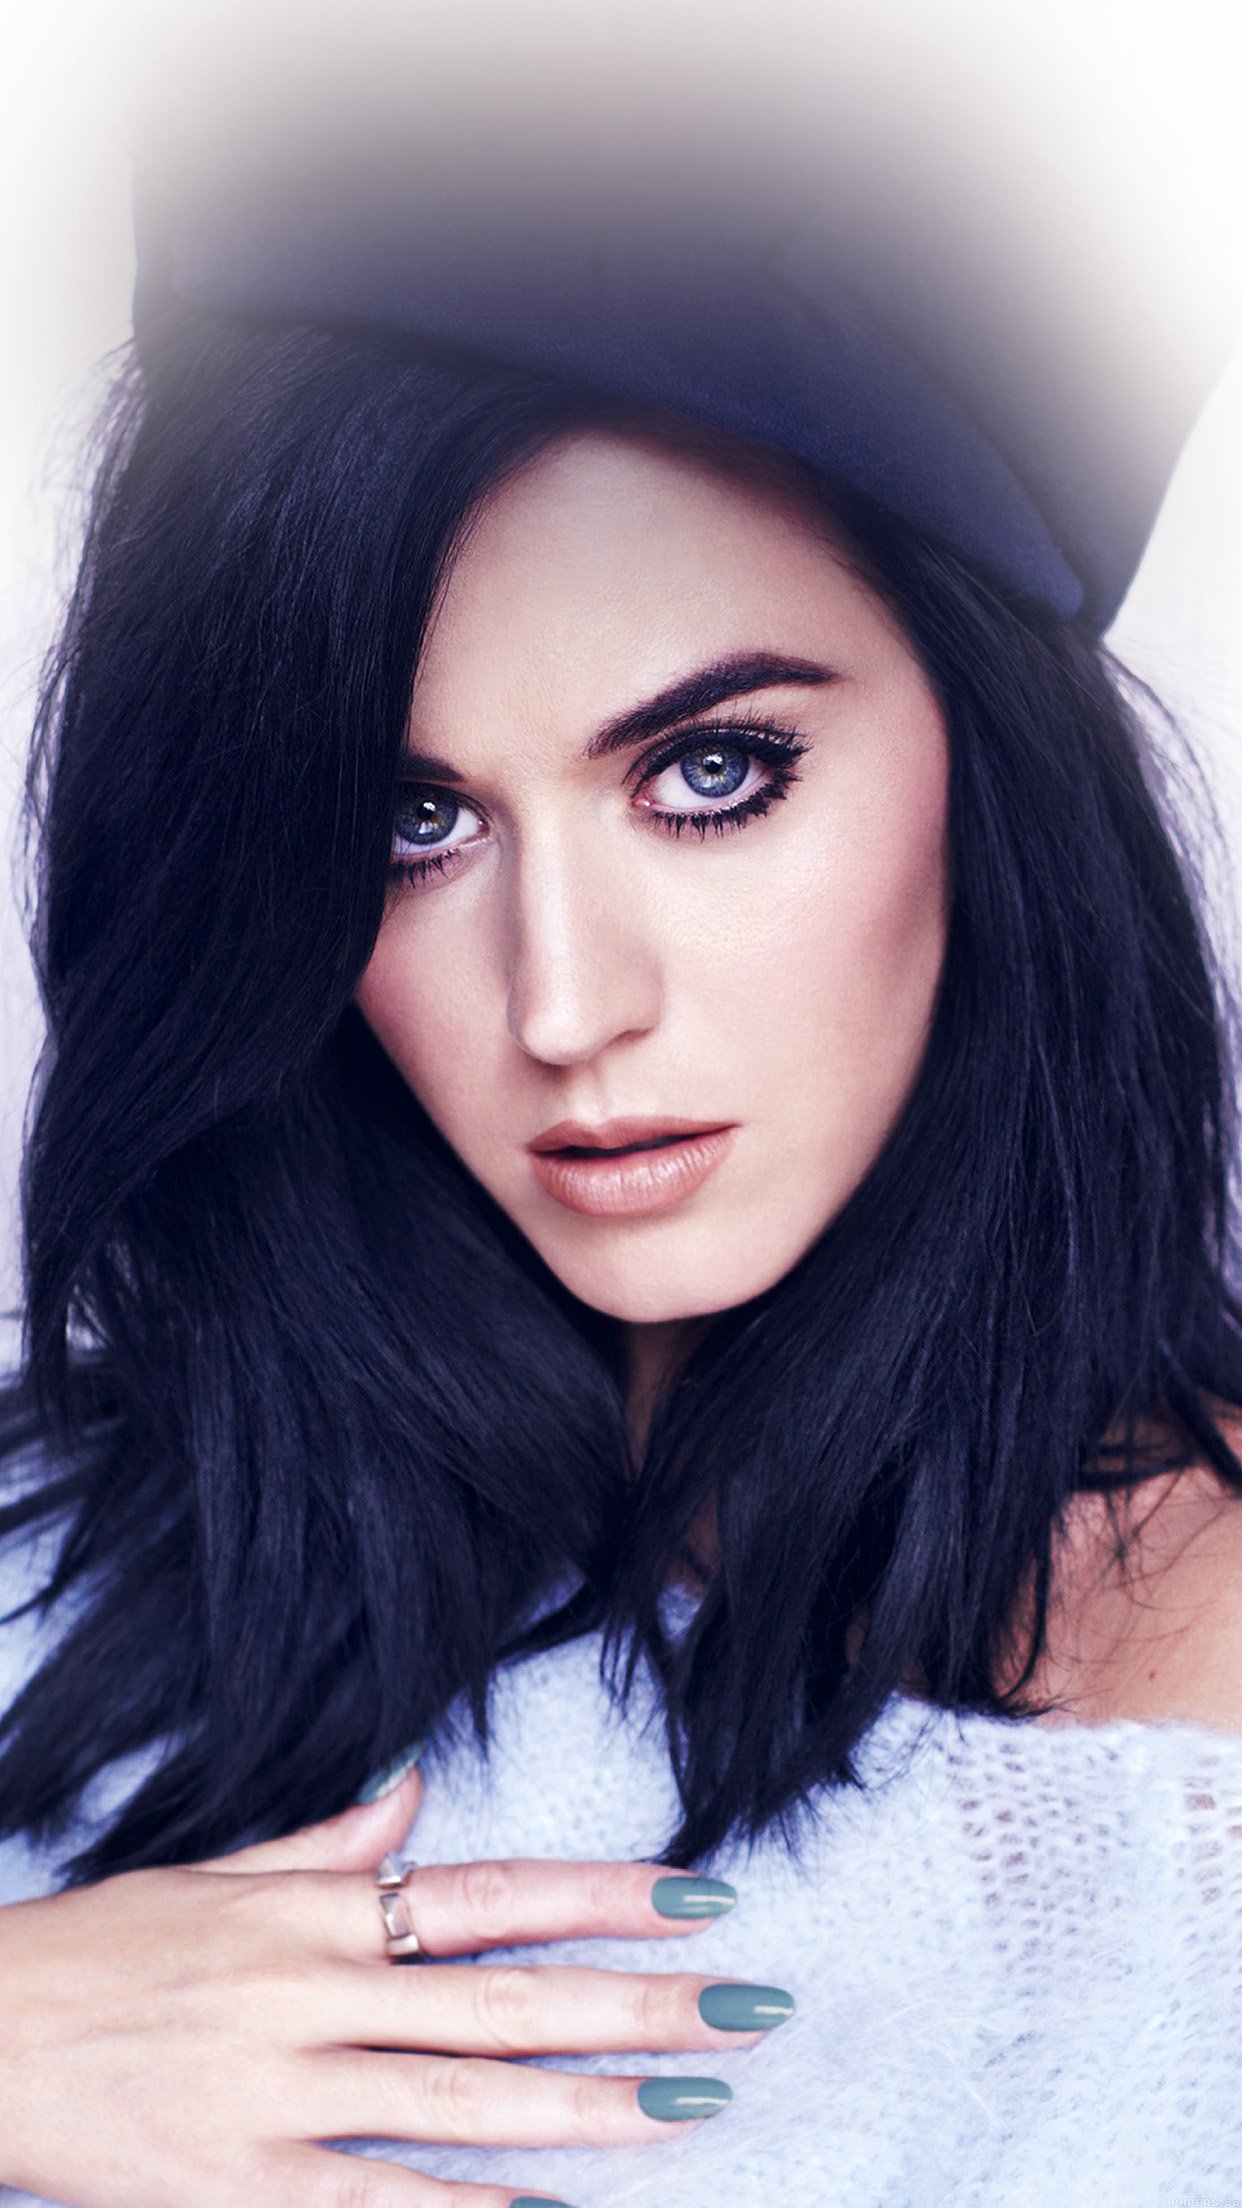 Katy Perry Music Artist Singer Android wallpaper